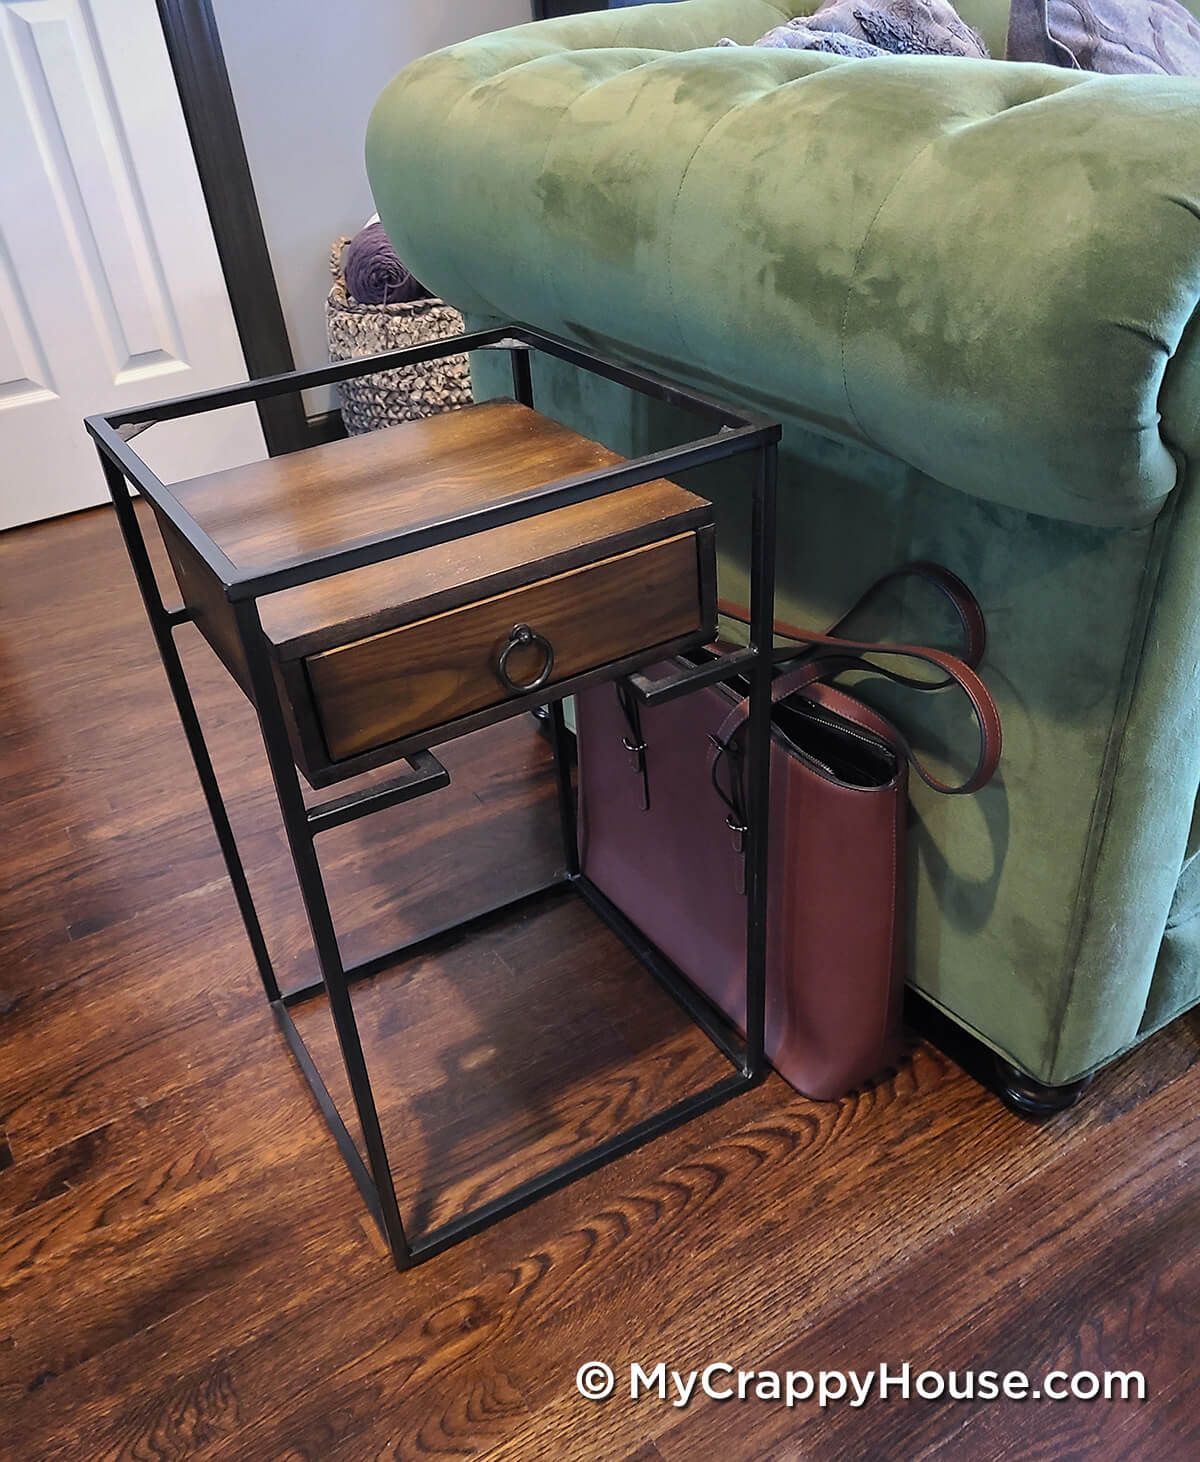 Metal and wood end table next to green couch